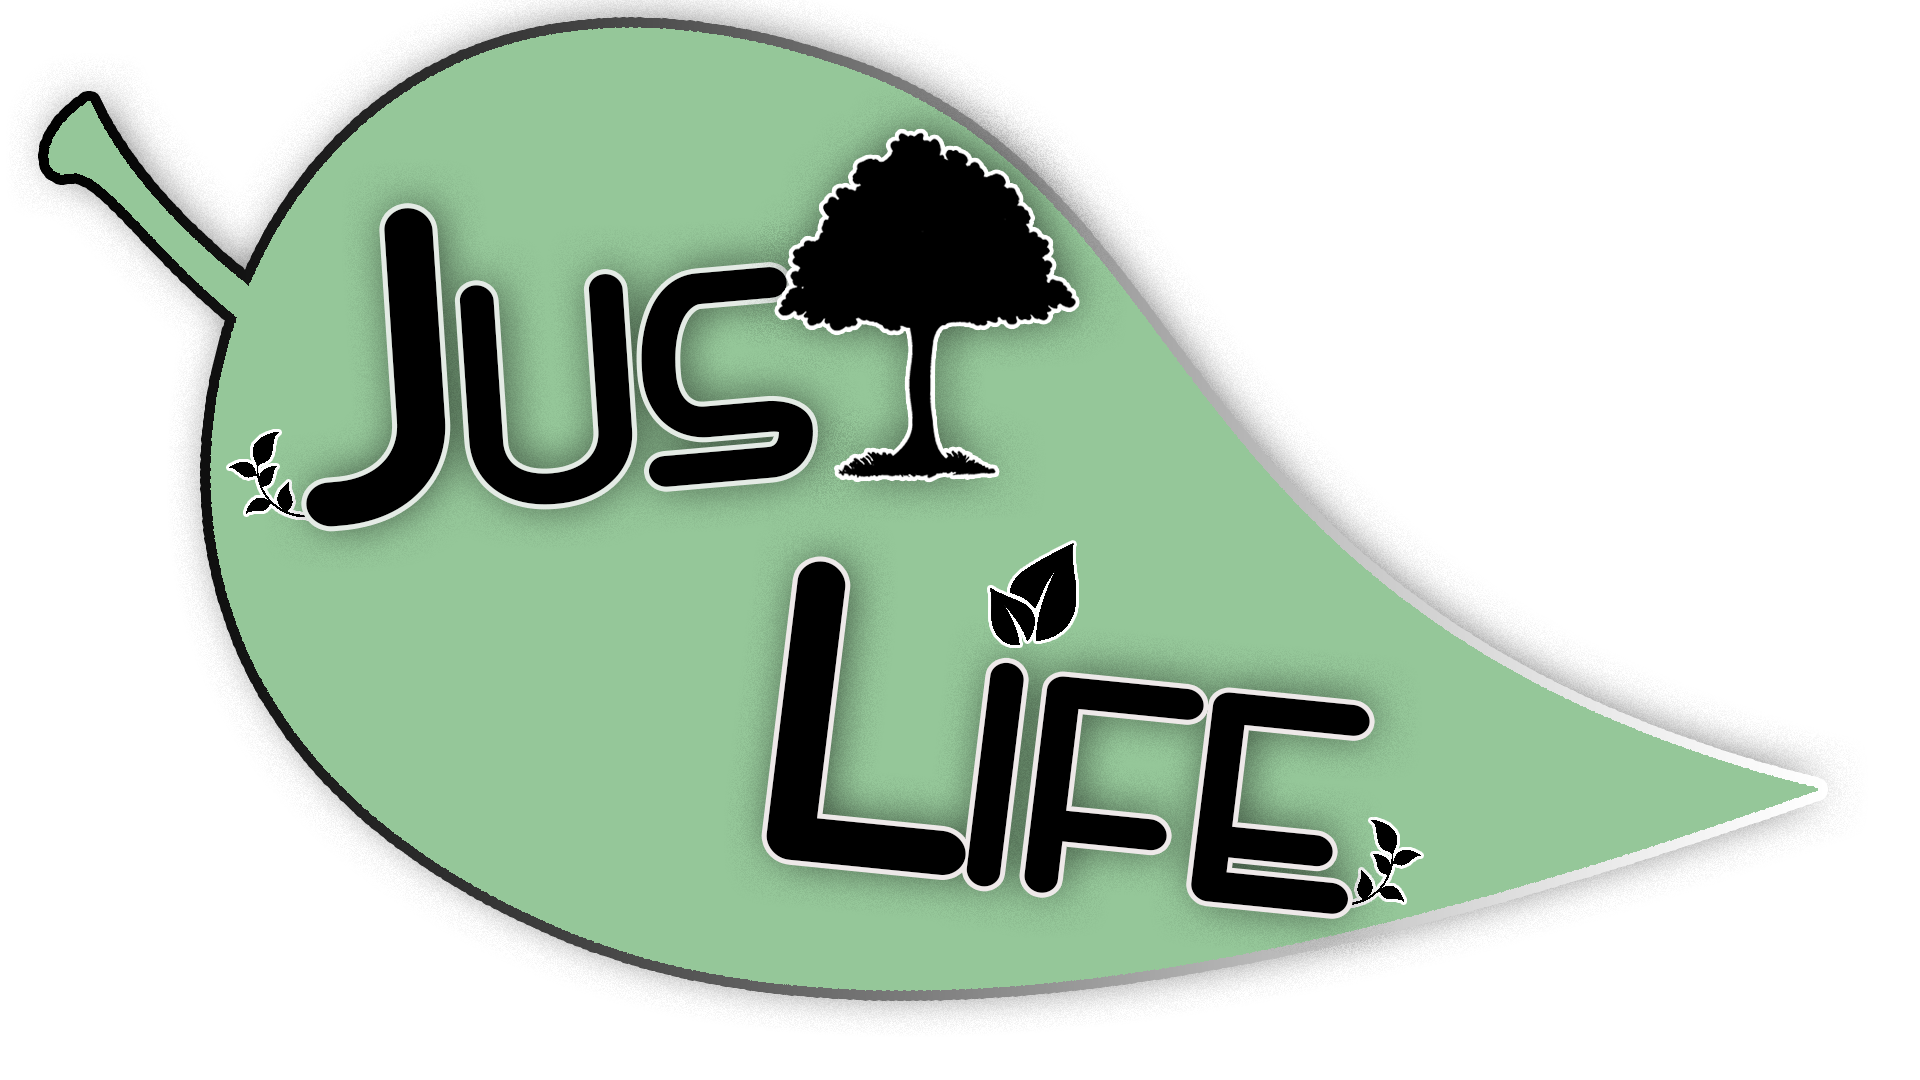 Just life 4